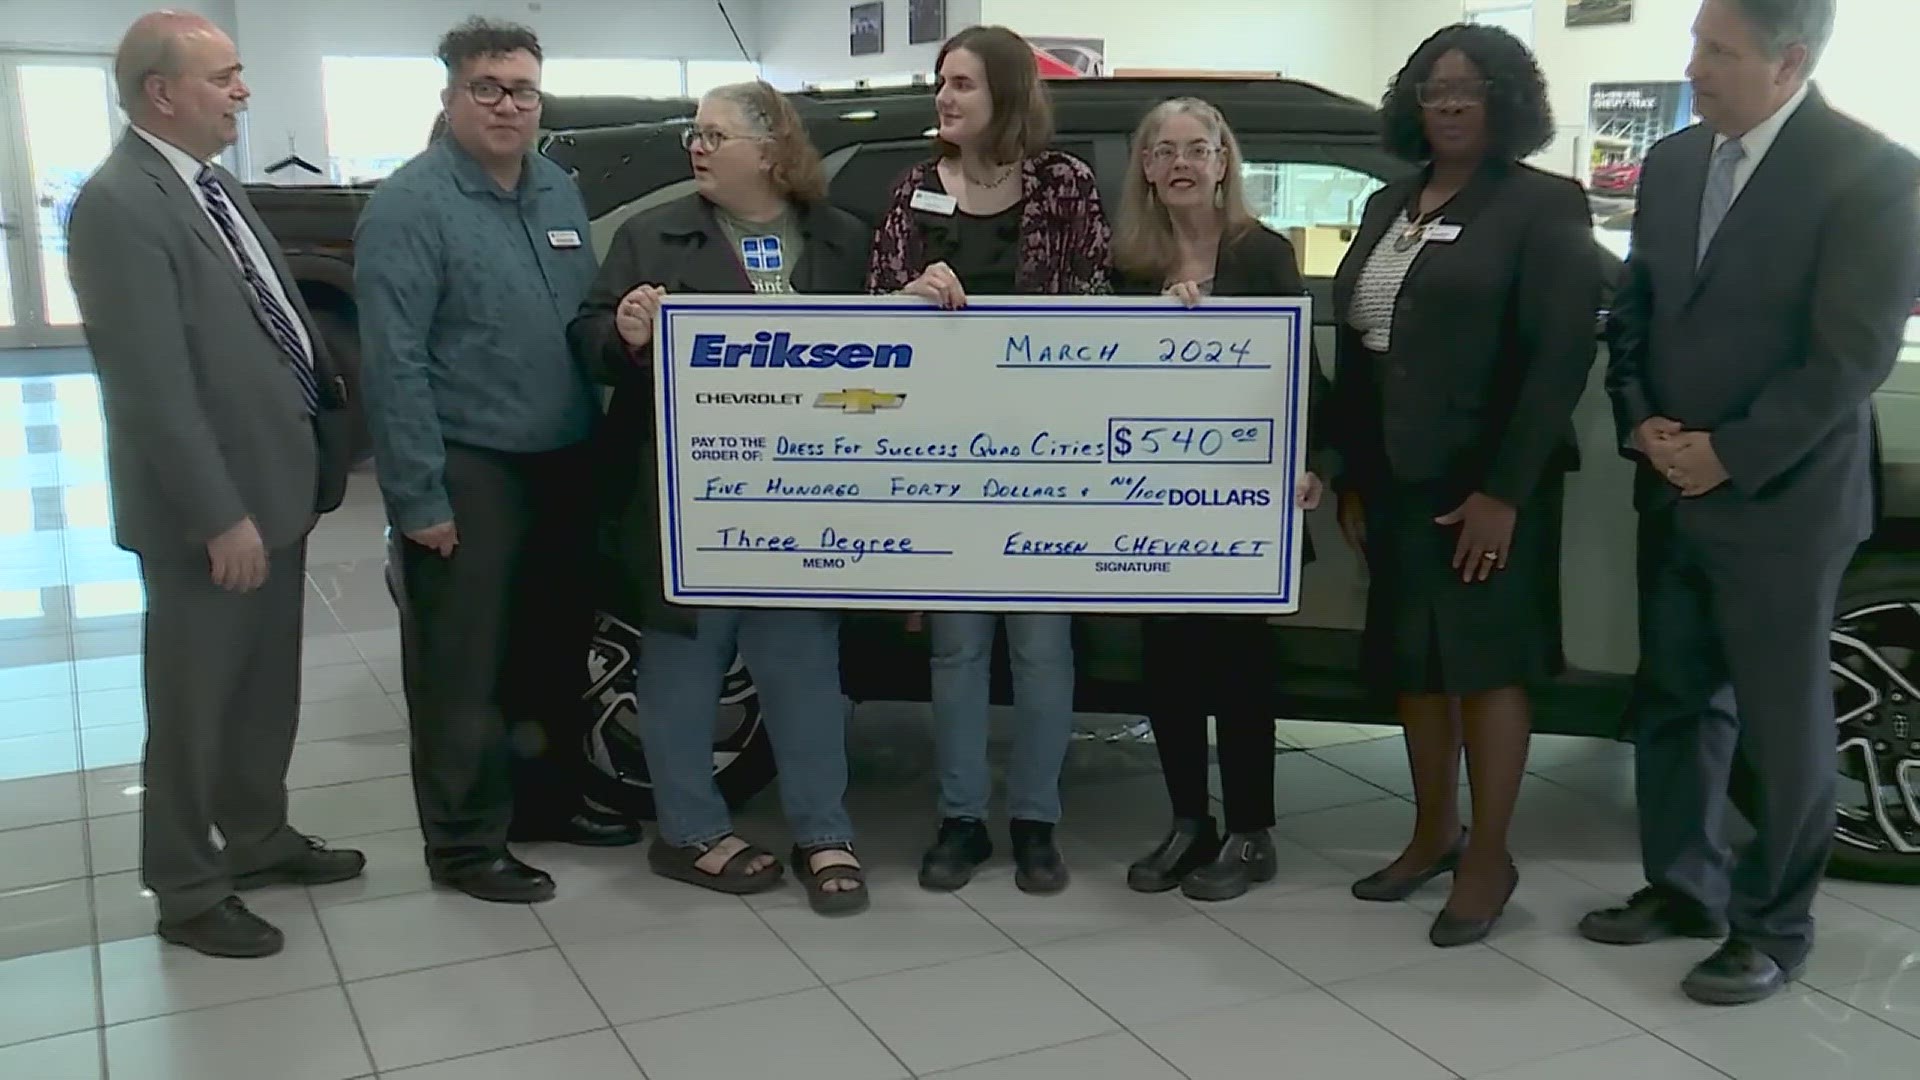 Dress for Success Quad Cities has received $540 from Erikson Chevrolet as the Three Degree Recipient for March 2024.